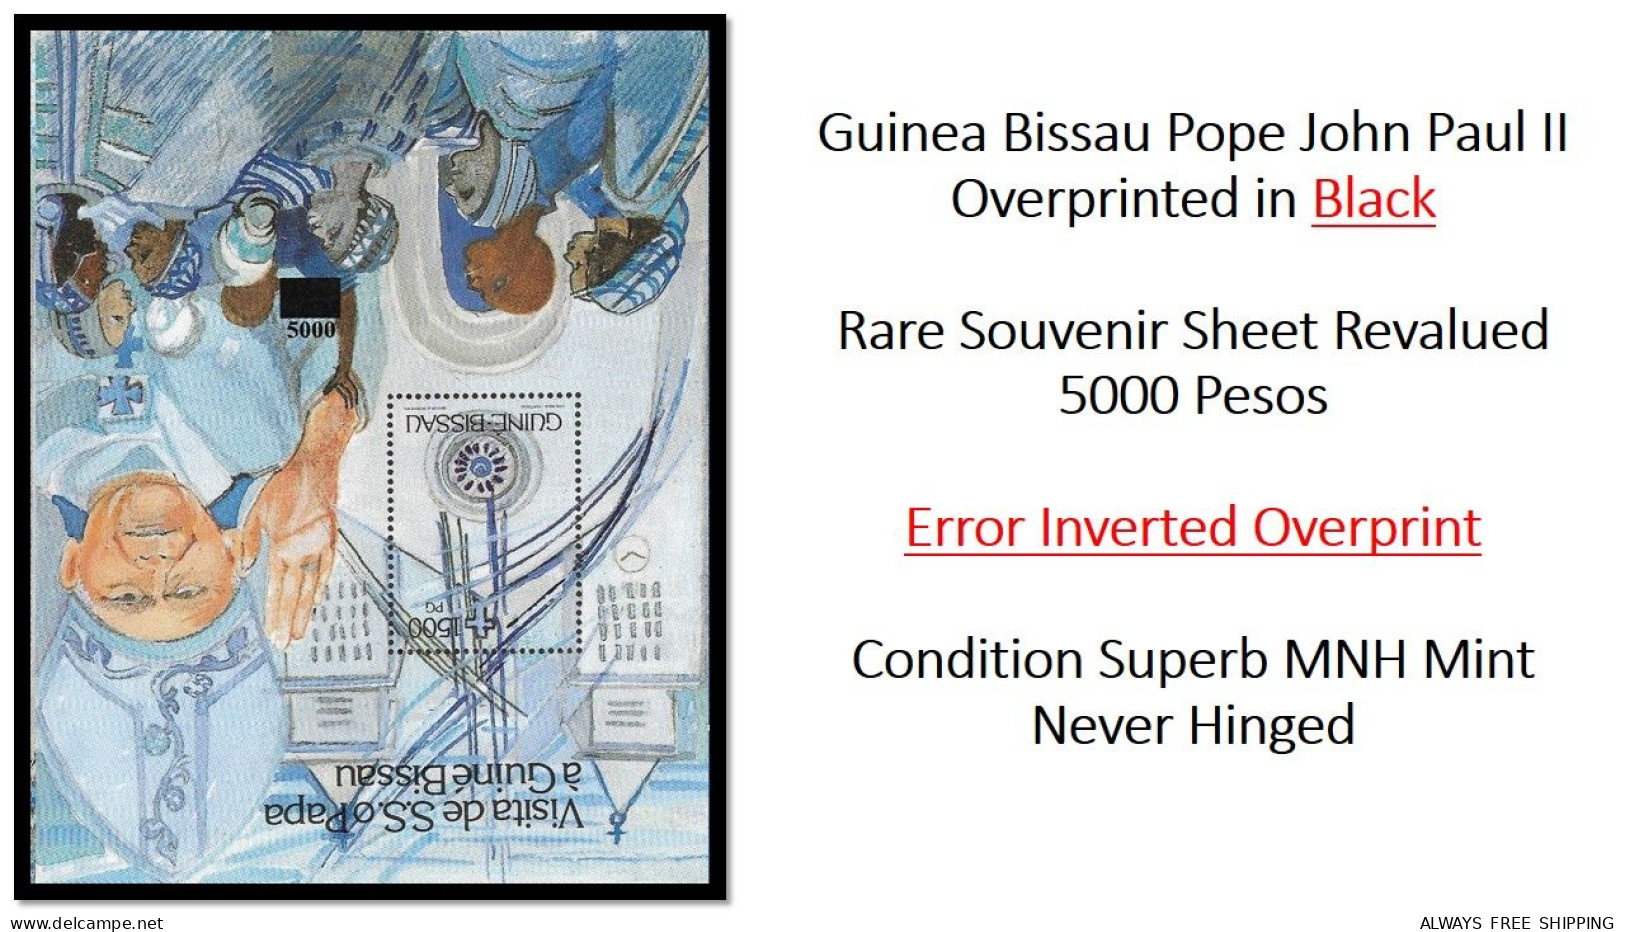 Guinea Bissau 1999 His Holiness Pope John Paul II - Error Overprint Inverted Surcharge Rare Only 5 Exist MNH - Papi